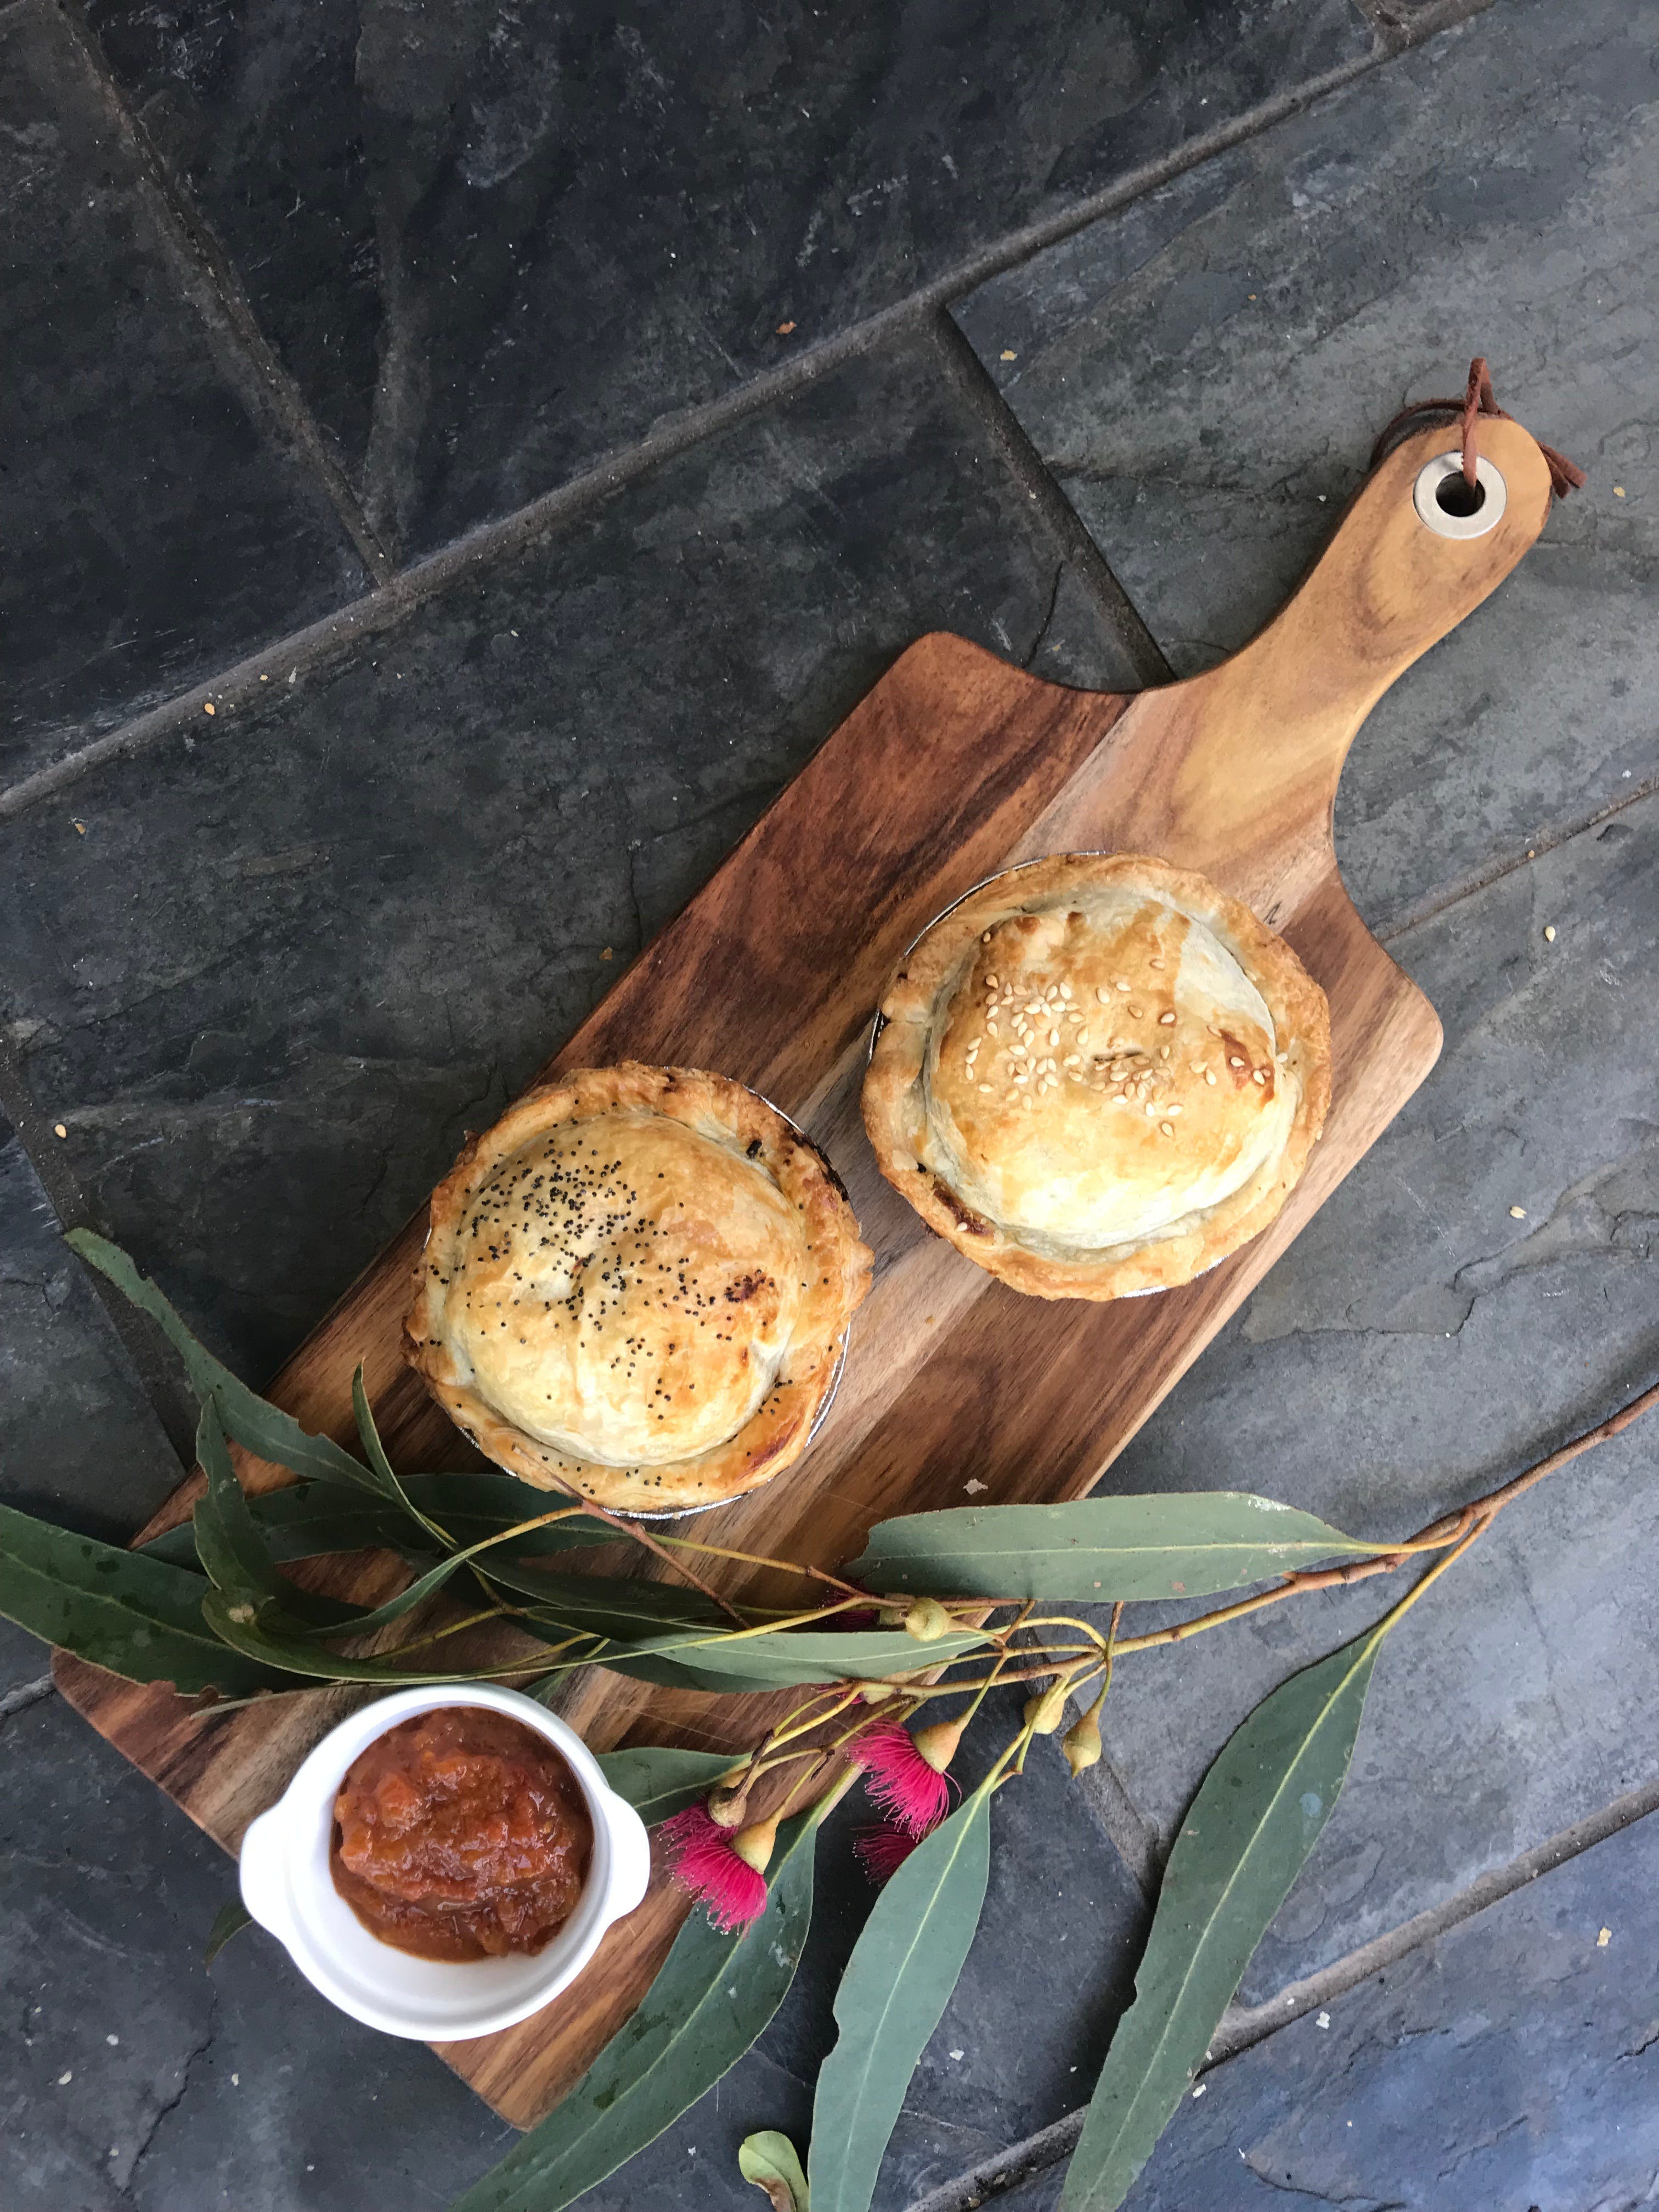 Aged Wine and Vintage Pies - Tourism Canberra